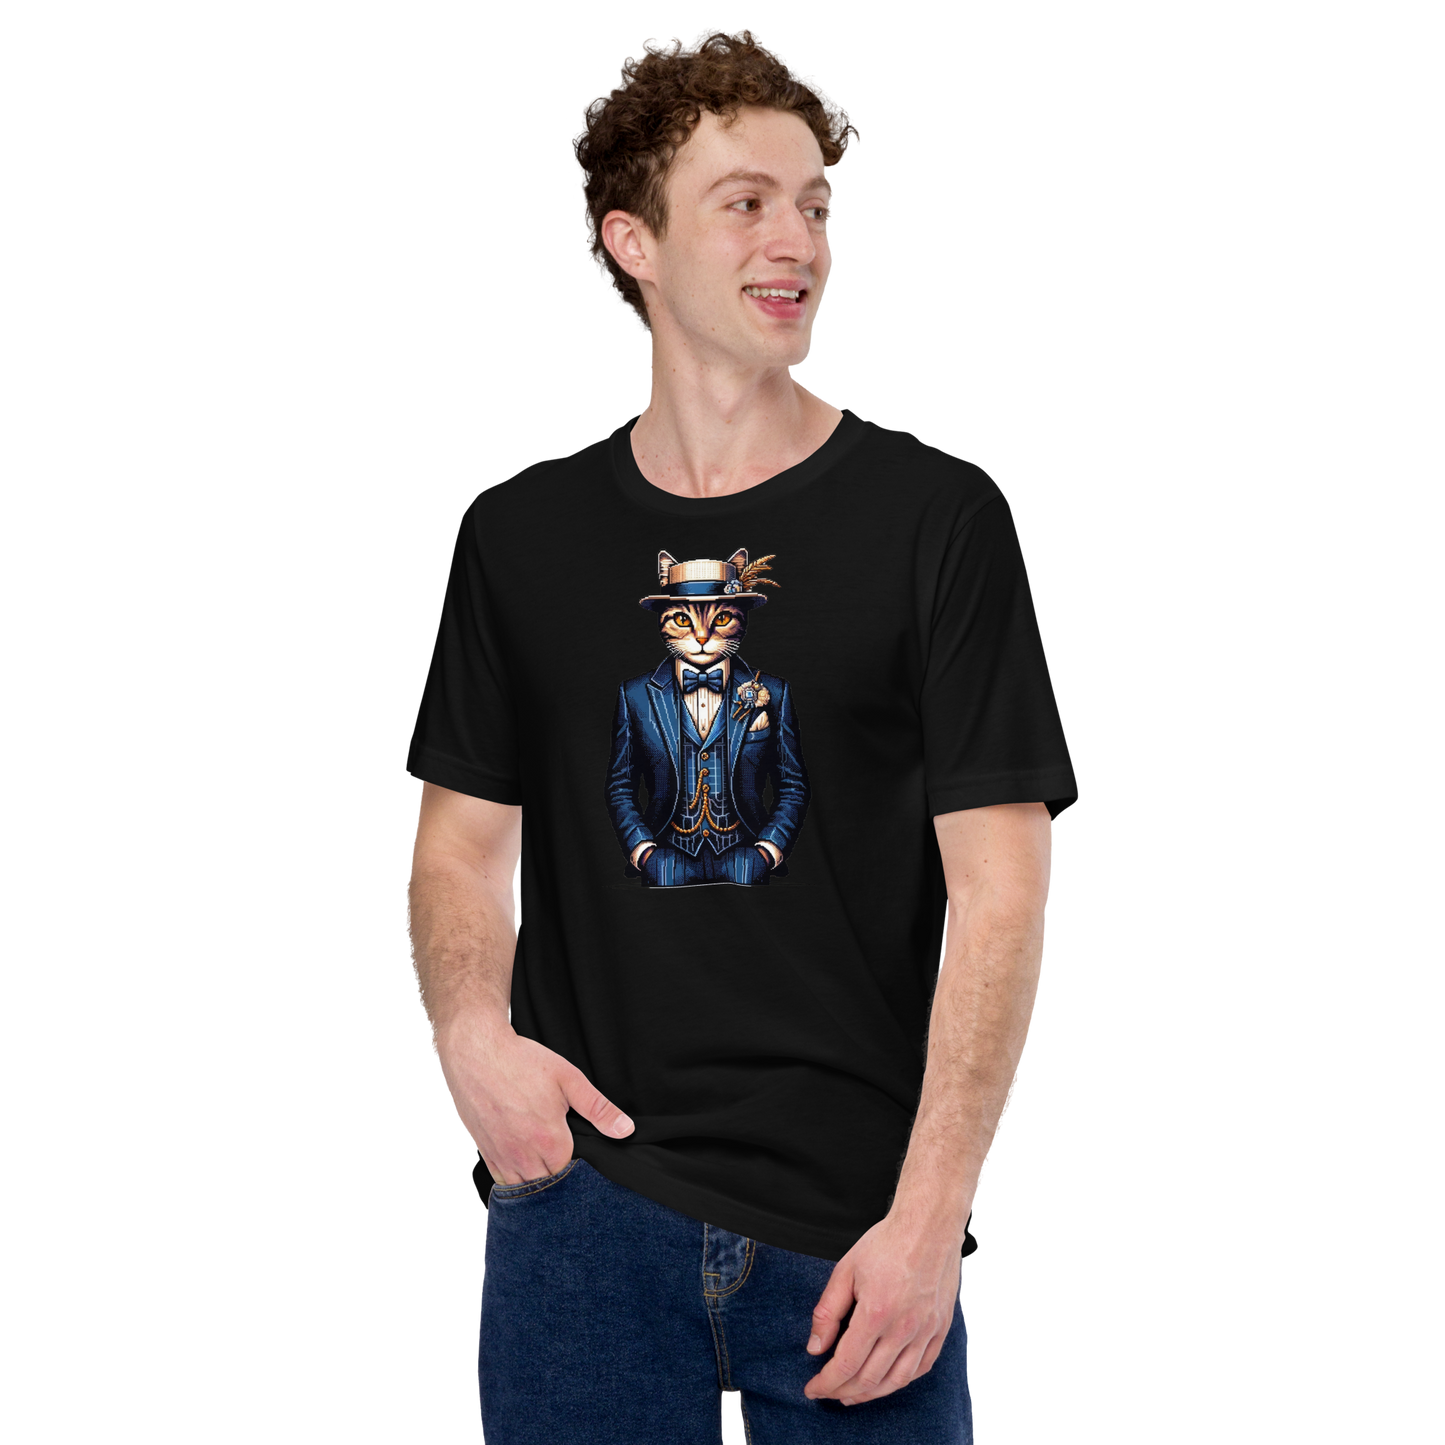 "The Great Catsby" Unisex Shirt